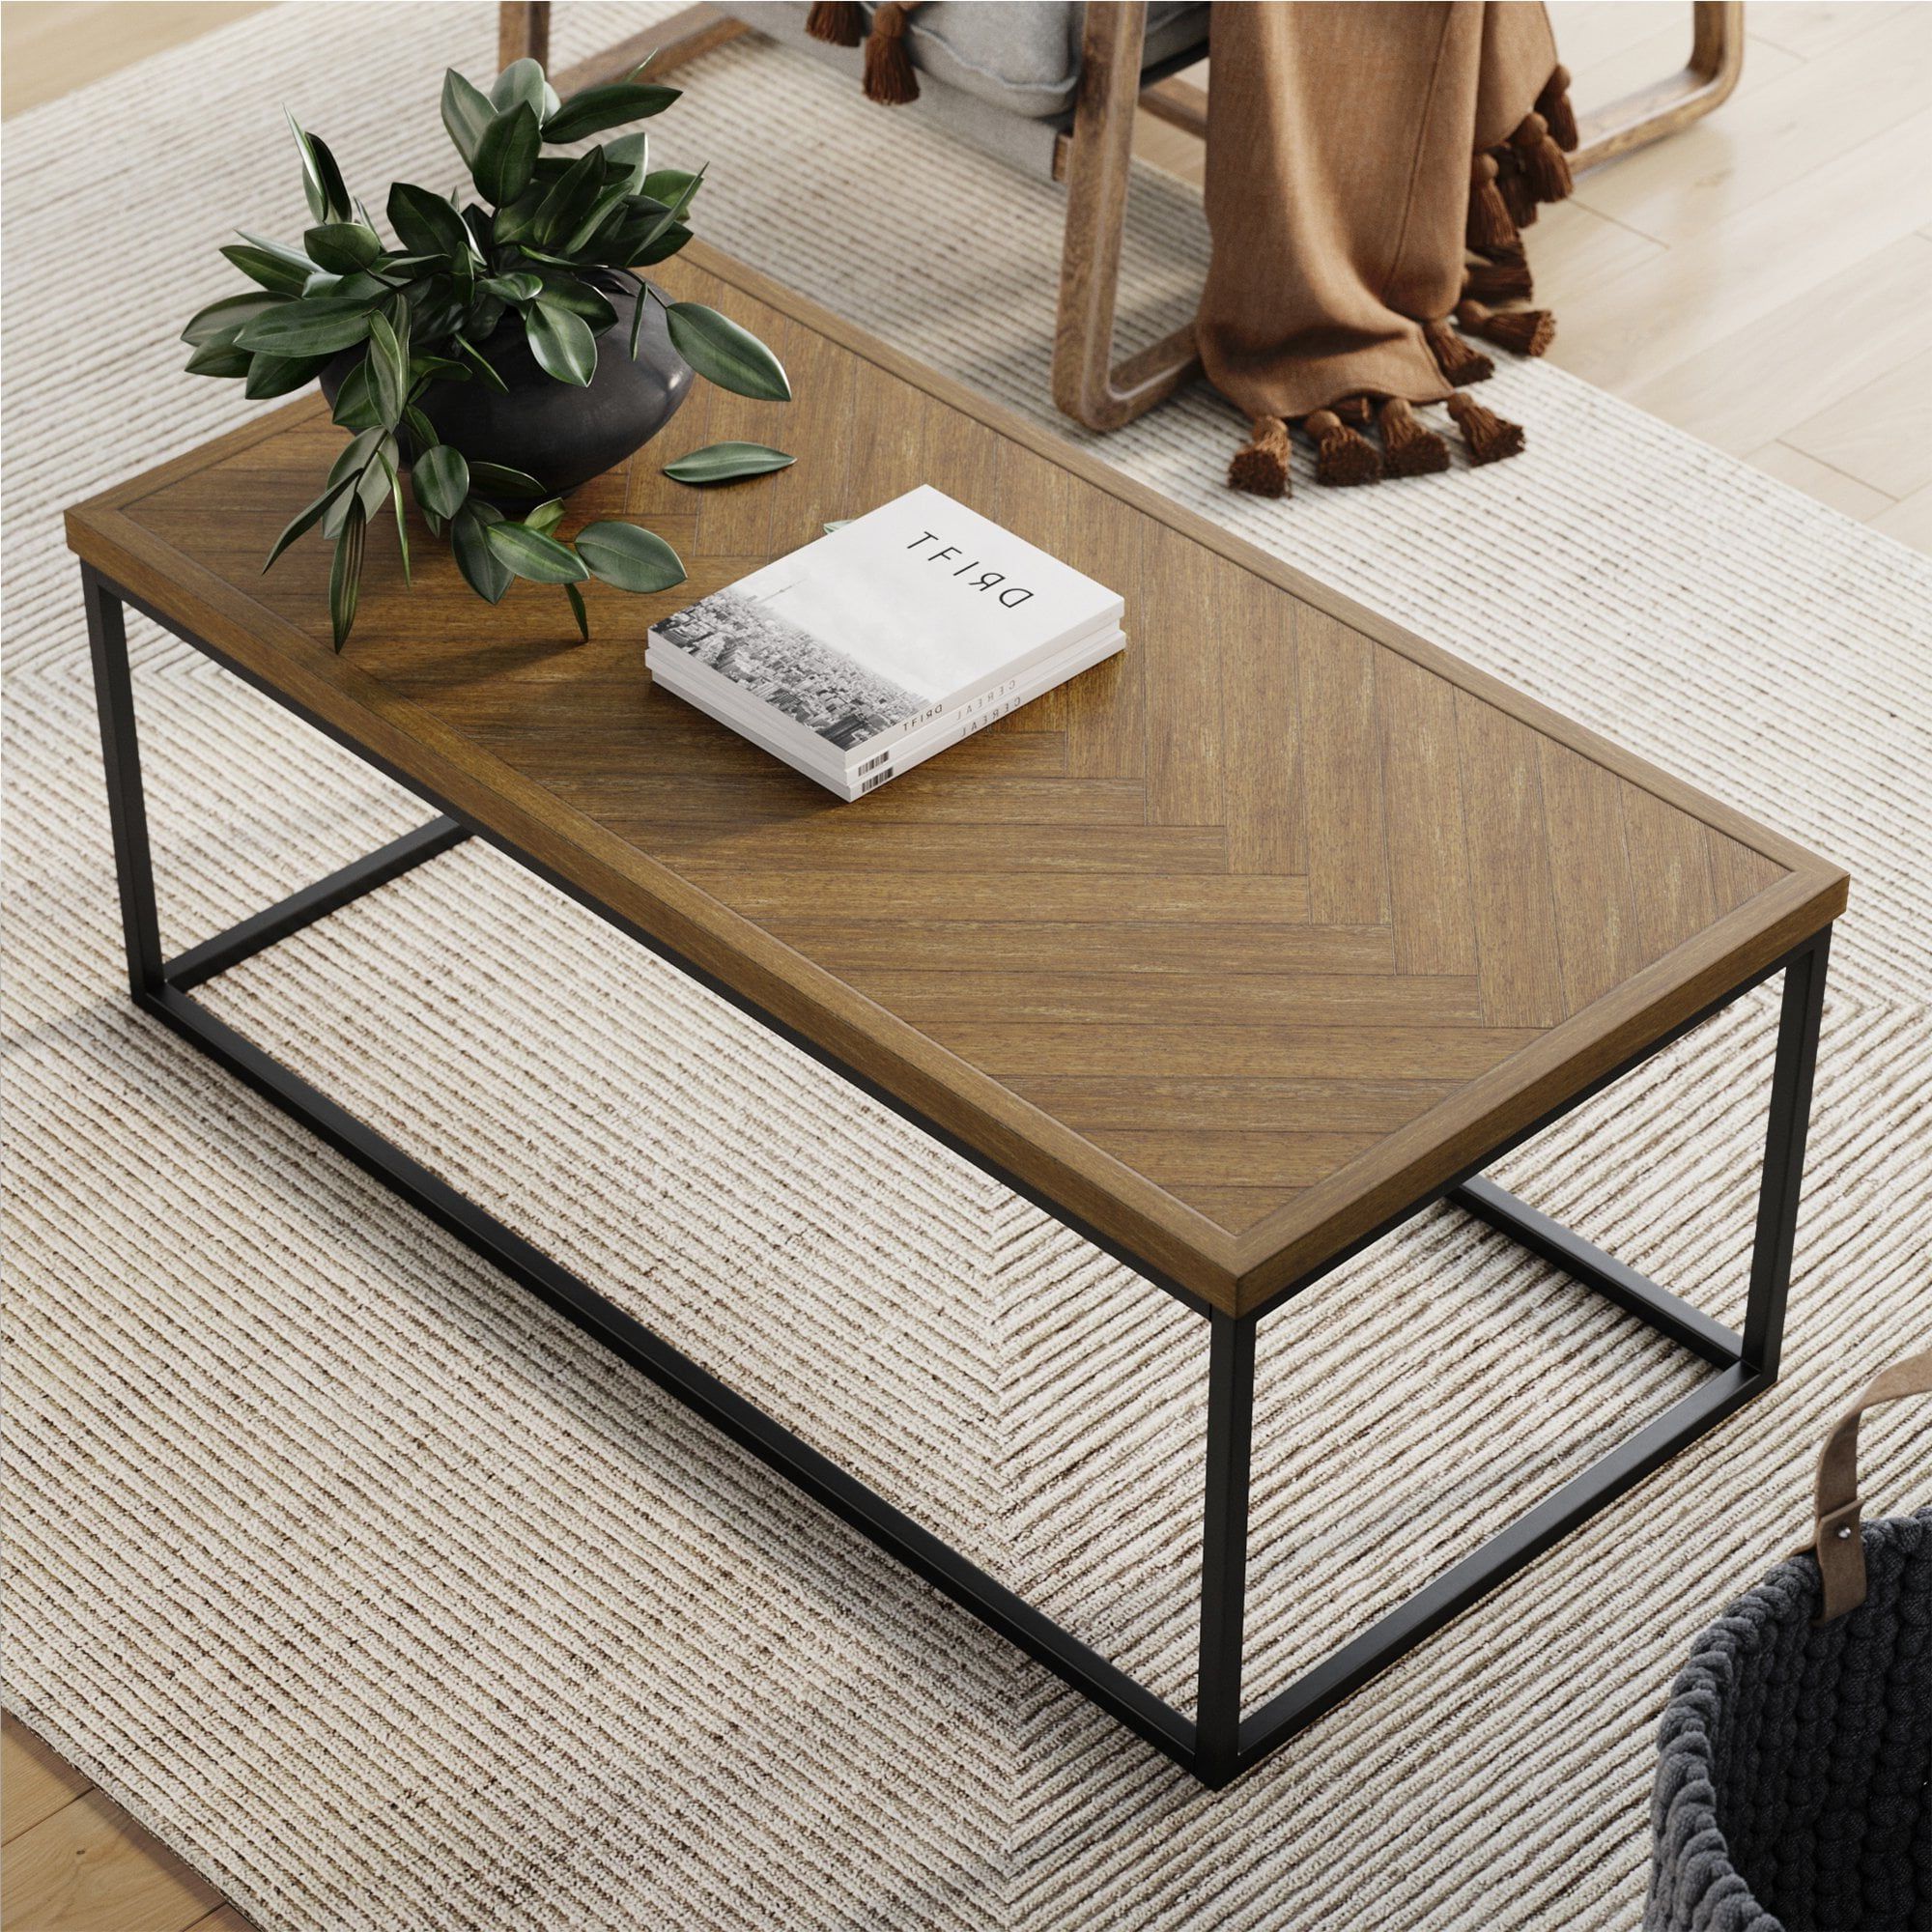 Modern Wooden X Design Coffee Tables Inside Well Known Modern Industrial Coffee Table Wood / Ofm Industrial Modern Wood Top (View 13 of 15)